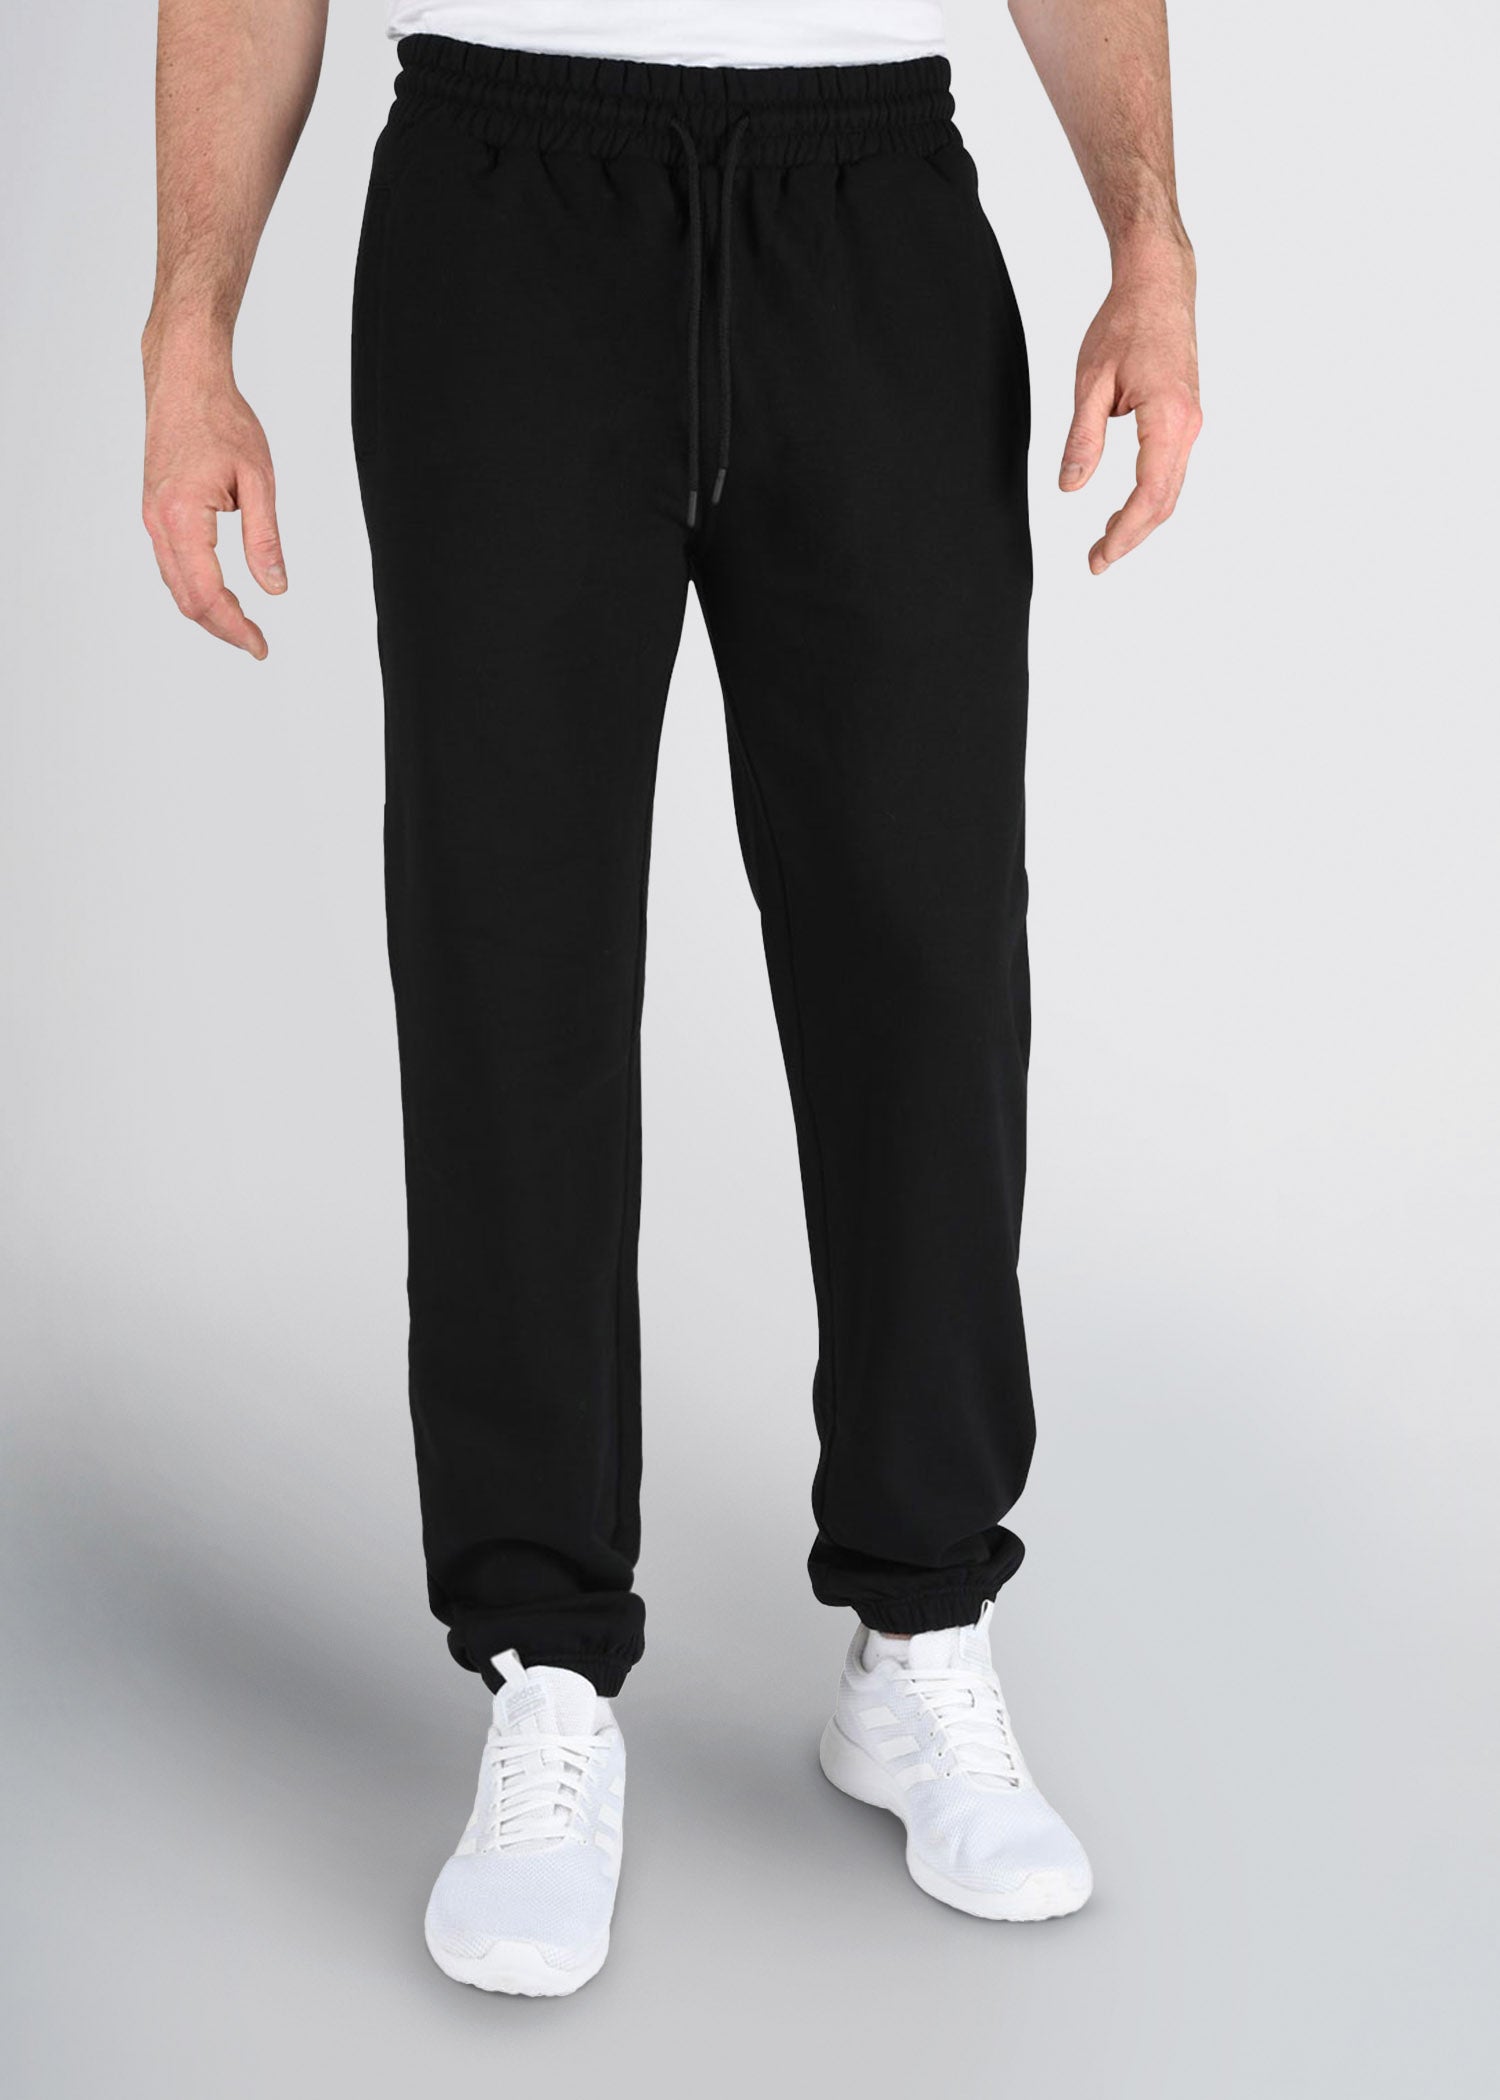 Where Do Tall People Find Extra Long Sweatpants? – solowomen